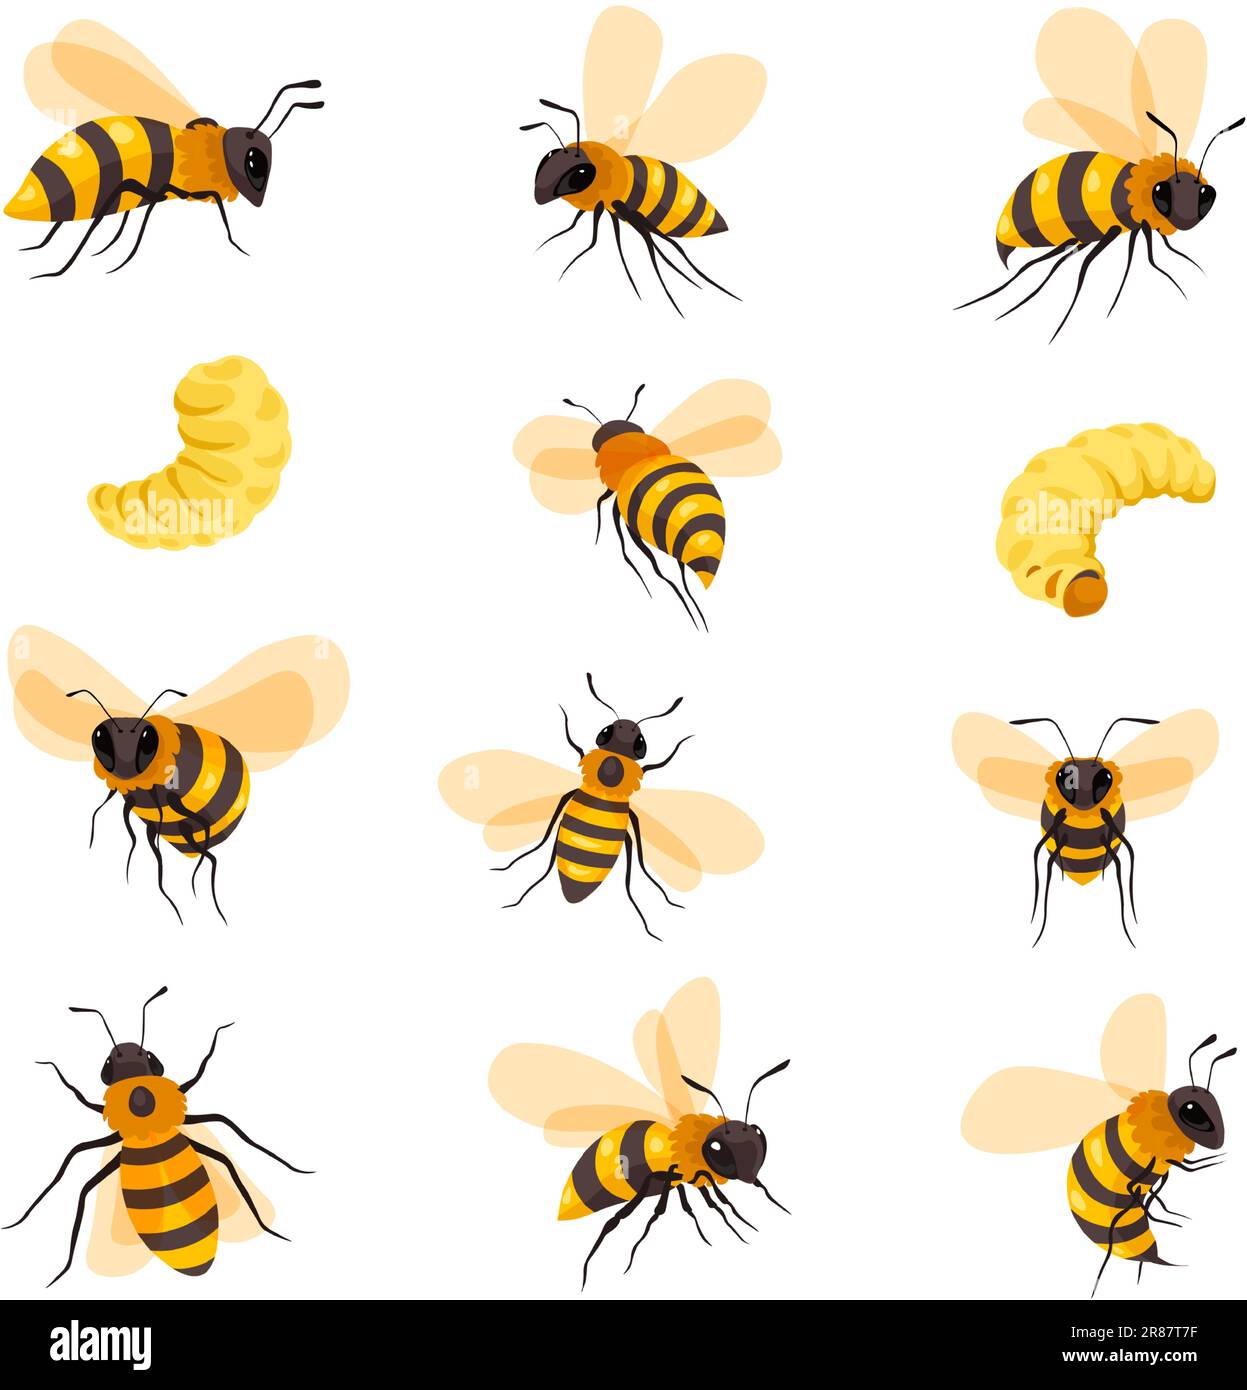 Bees lifecycle and portraits, honeybee and larva Stock Vector